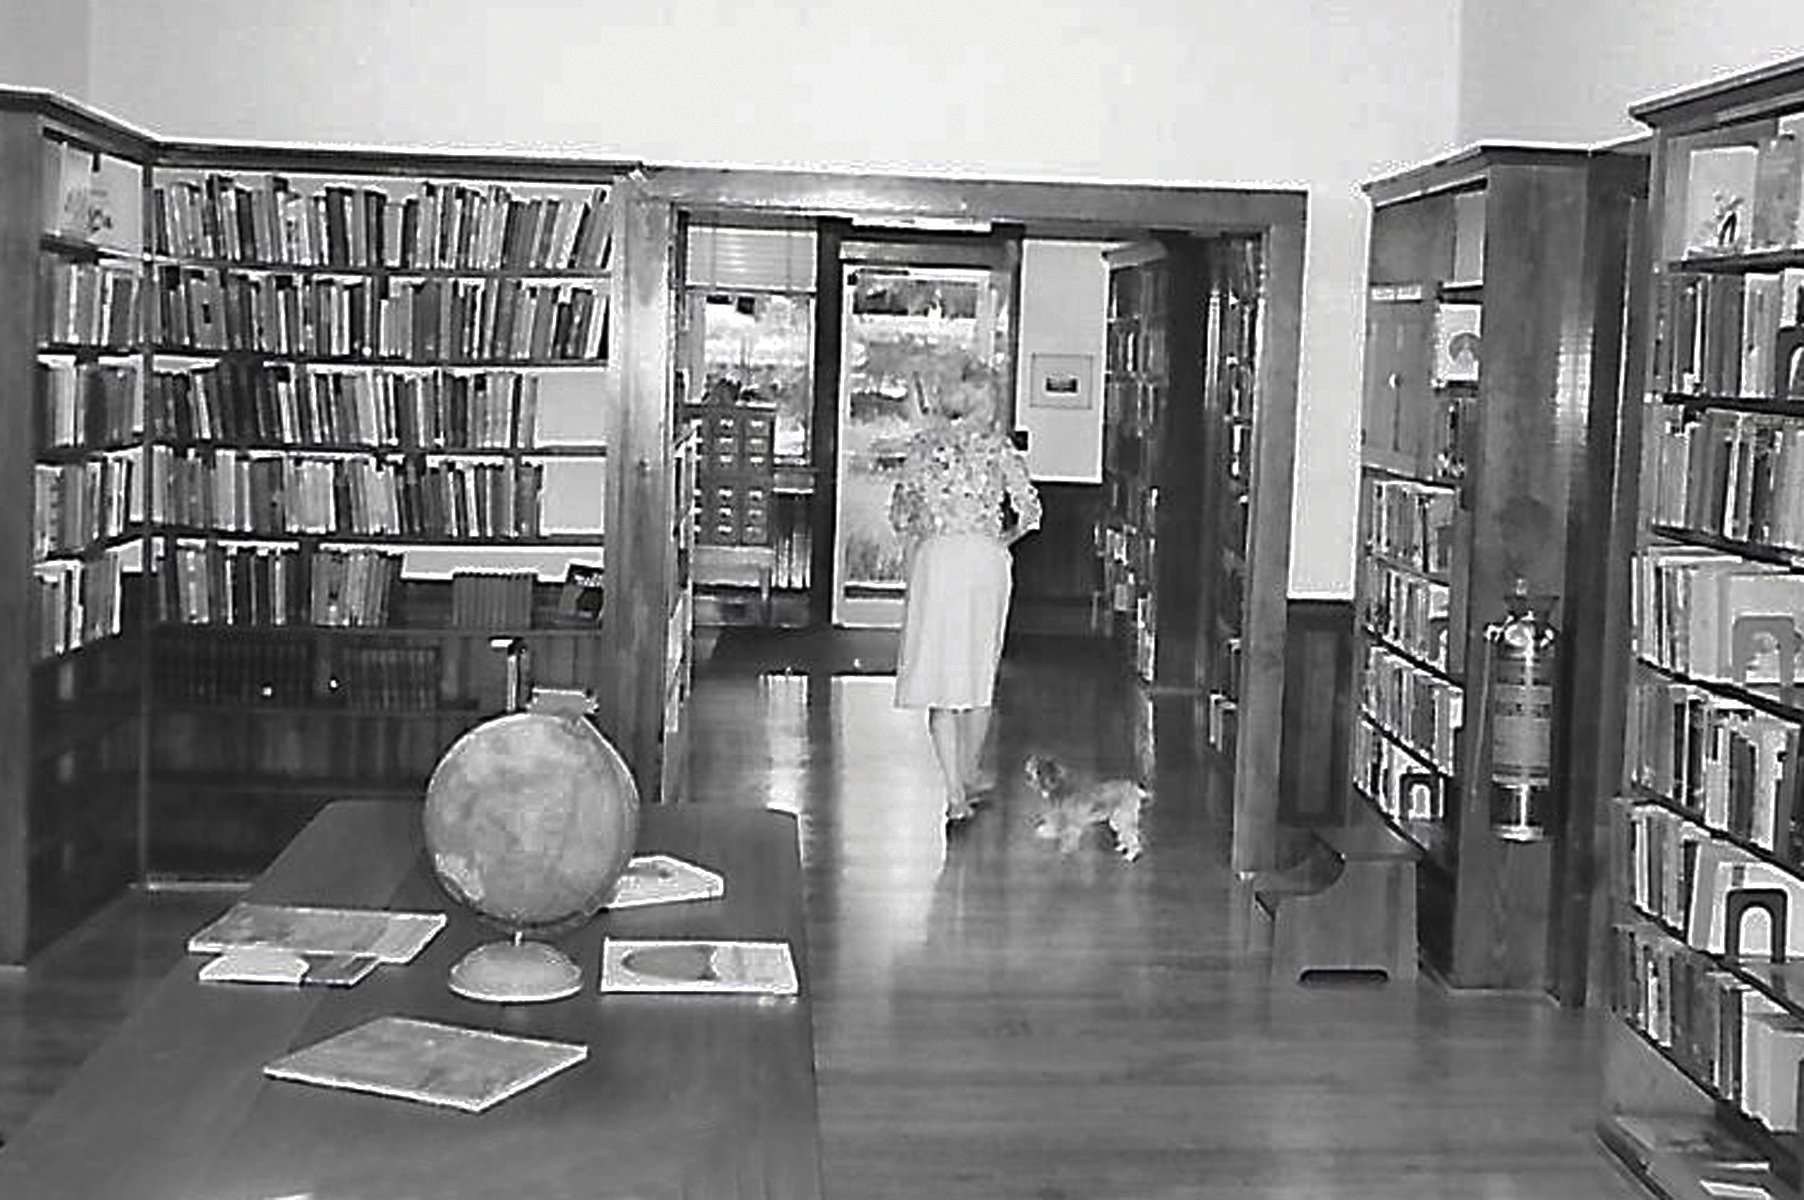 Lanier Library Tryon NC Dog in Library 1967